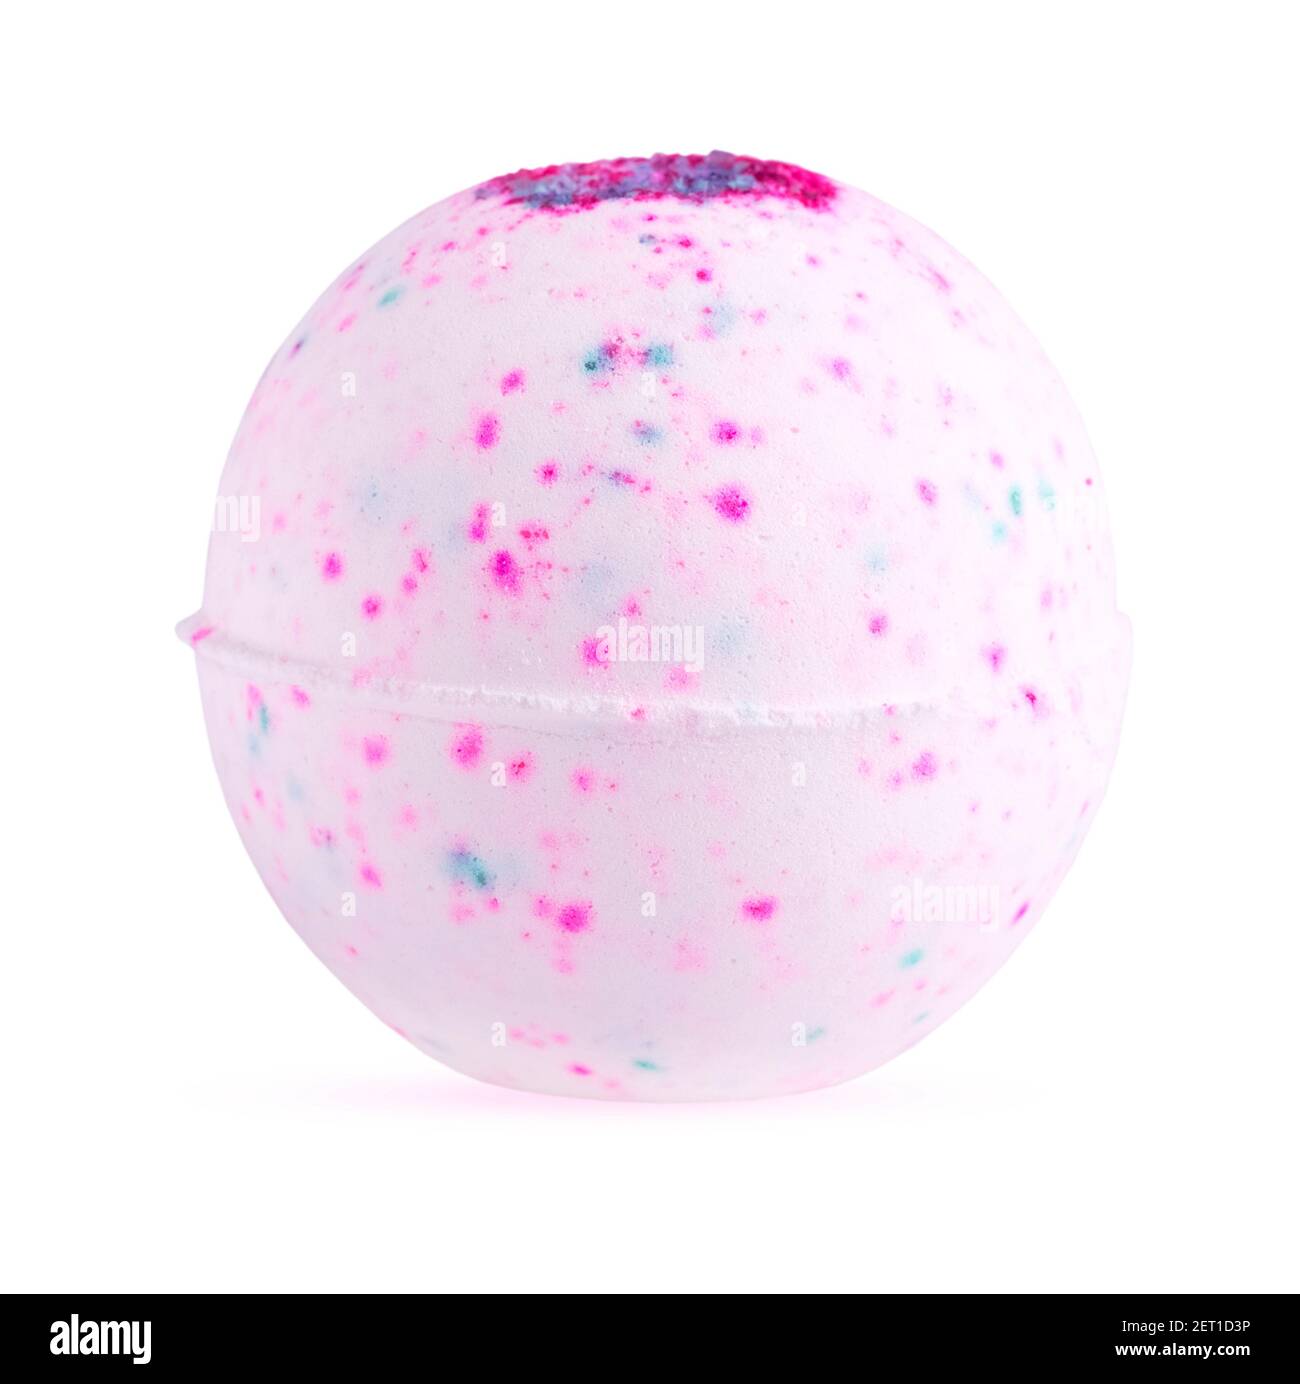 Round Handmade Pink Bath Bomb. Bath salts in the form of a ball. Stock Photo